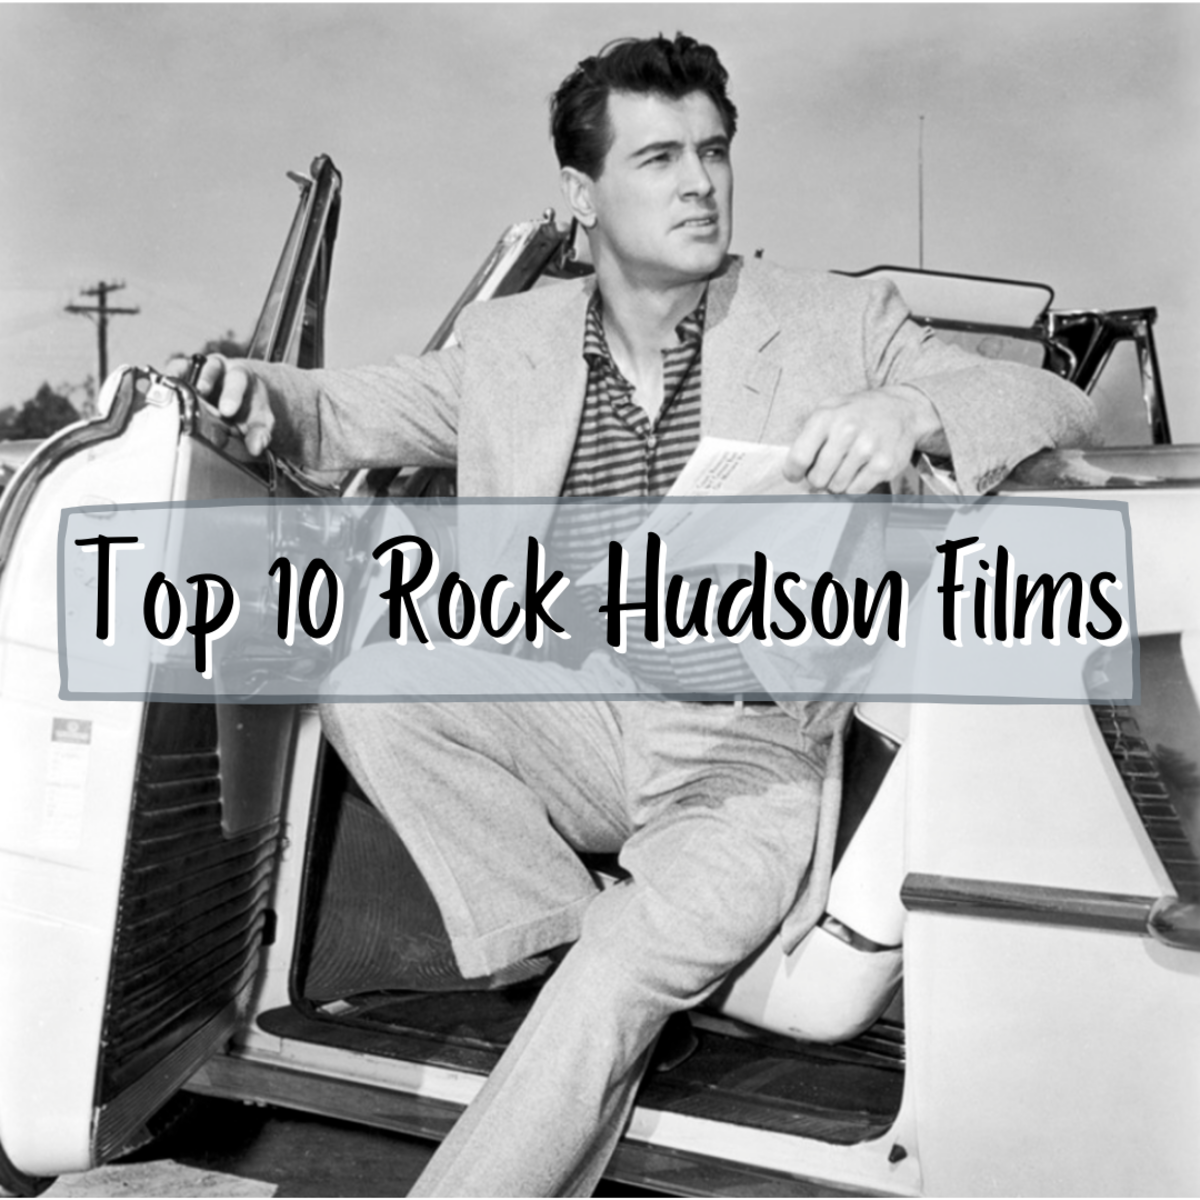 Read on for an in-depth look at the 10 best Rock Hudson movies of all time.